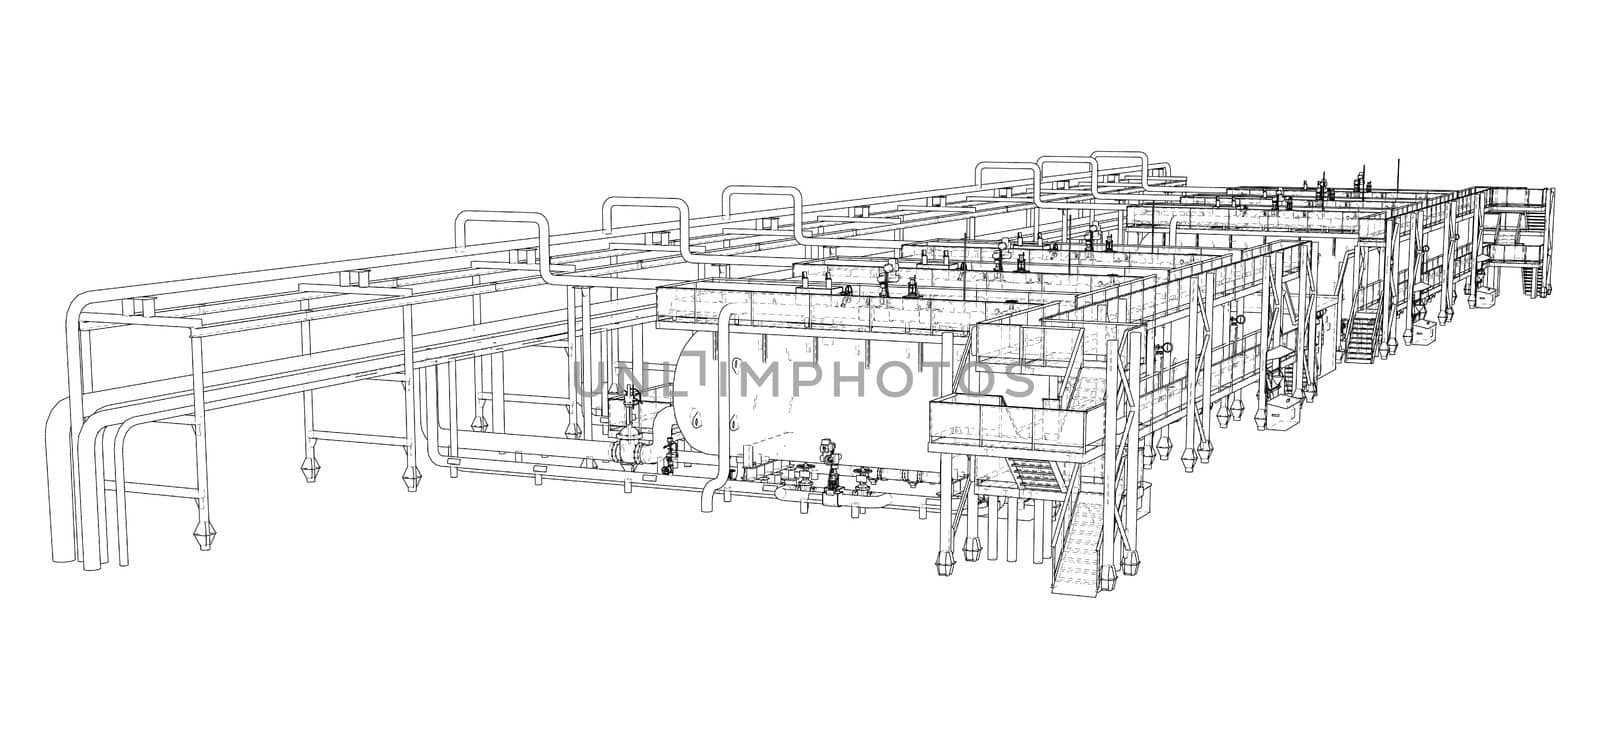 Sketch of industrial equipment by cherezoff